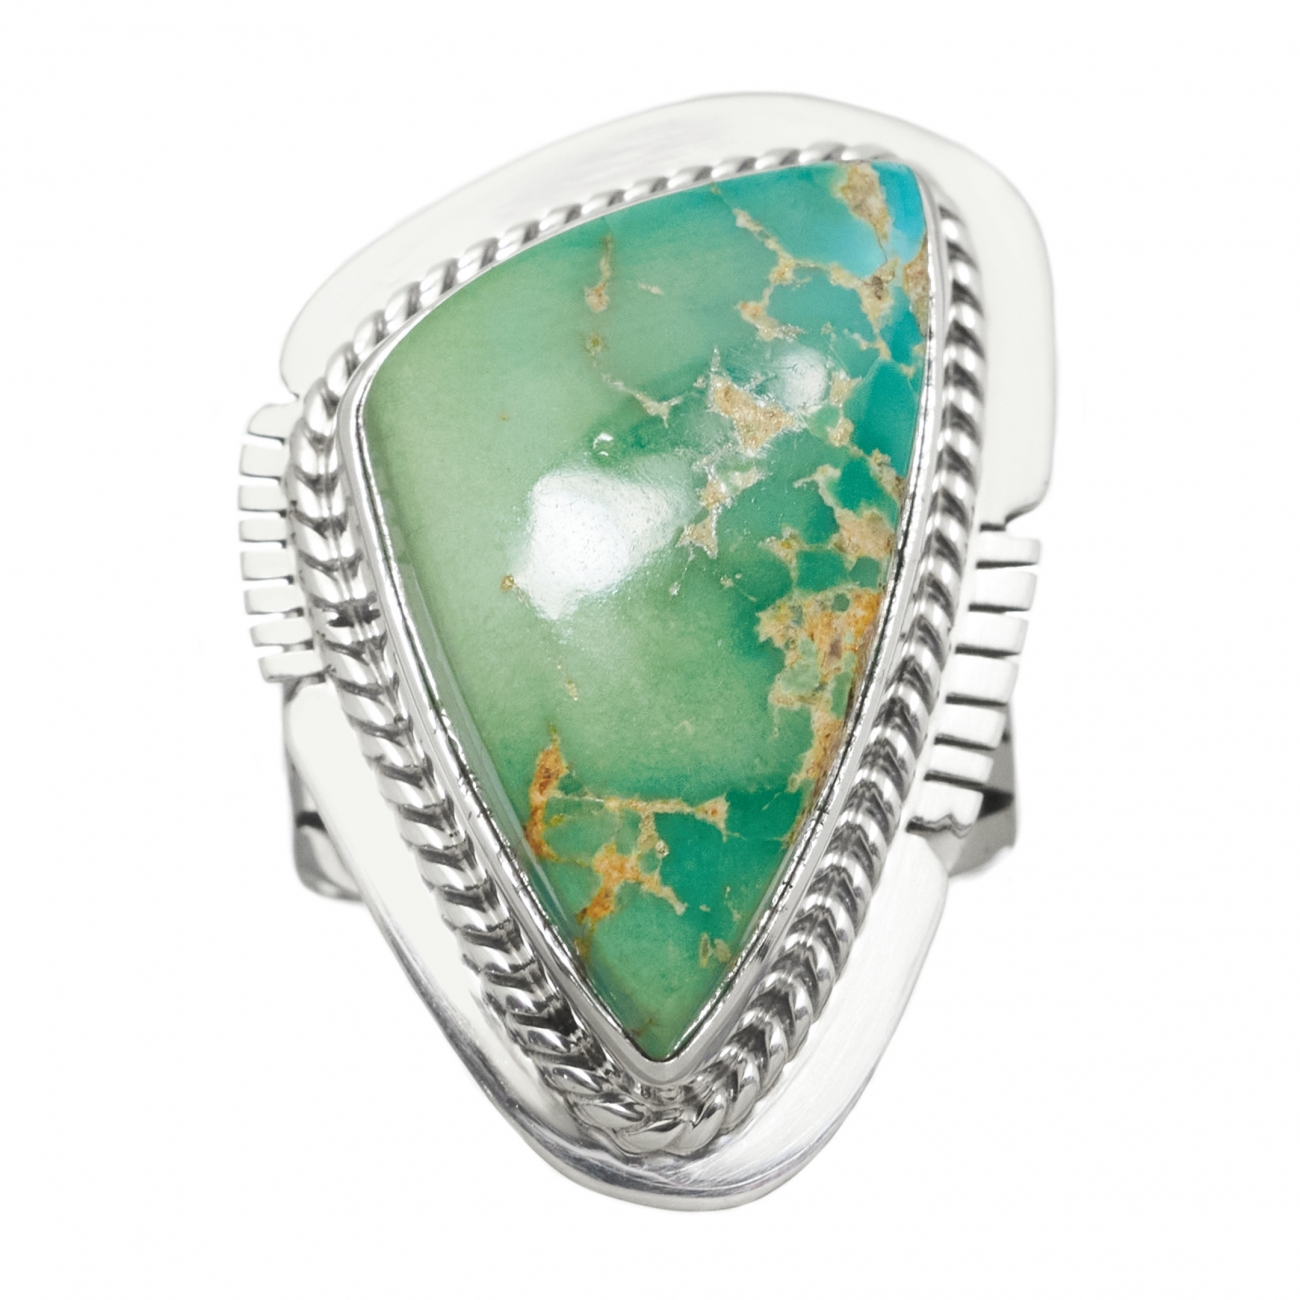 Navajo ring for women BA1050 in turquoise and silver - Harpo Paris